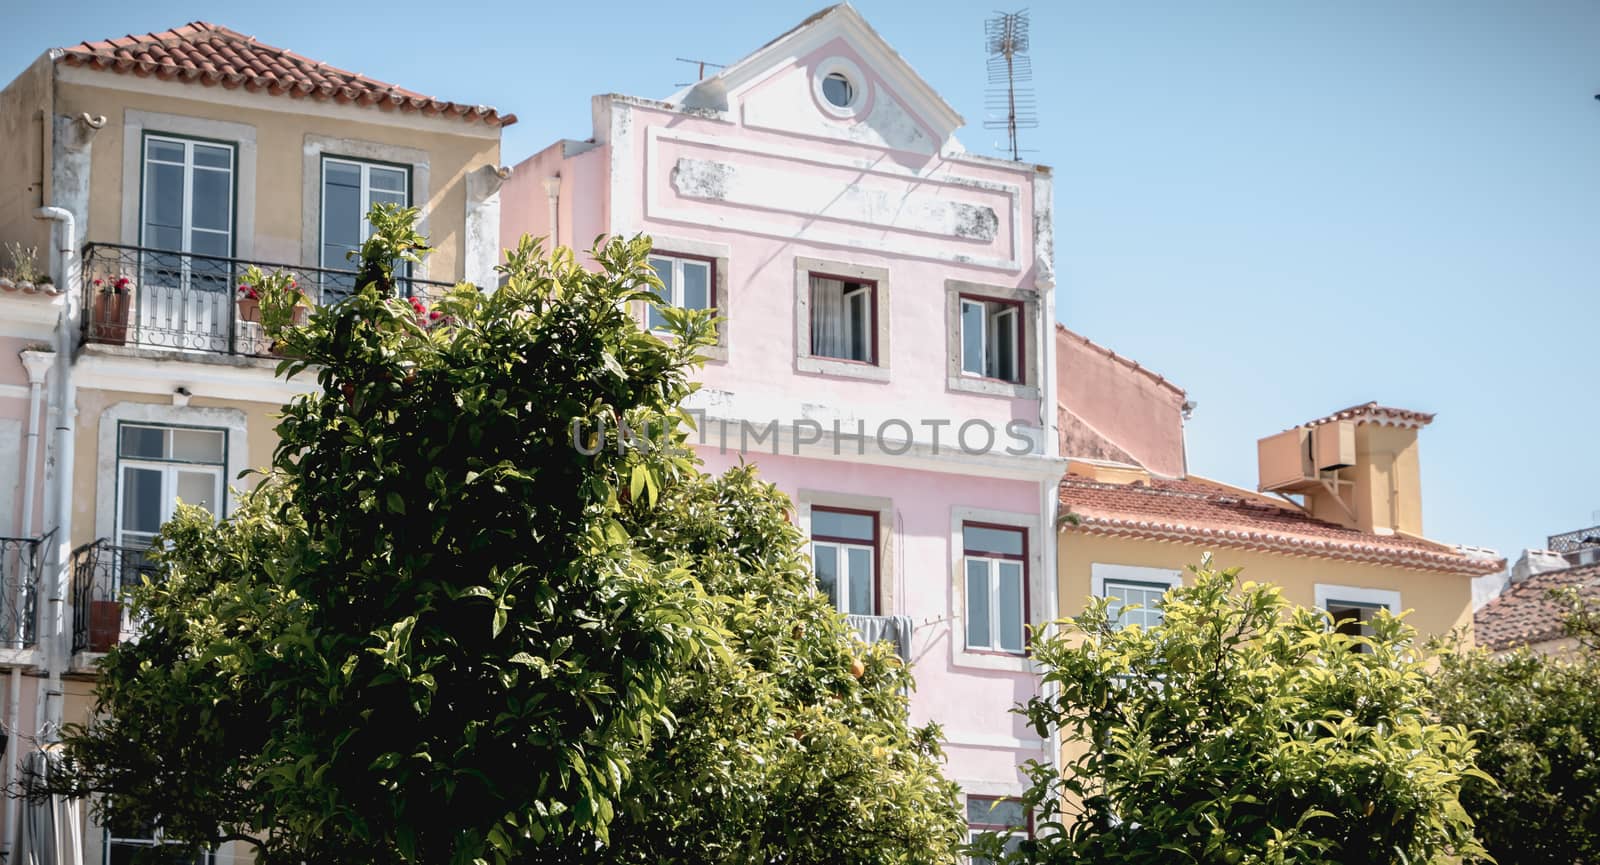 Lisbon, Portugal - May 7, 2018: Architectural detail of buildings typical of historic downtown on a spring day